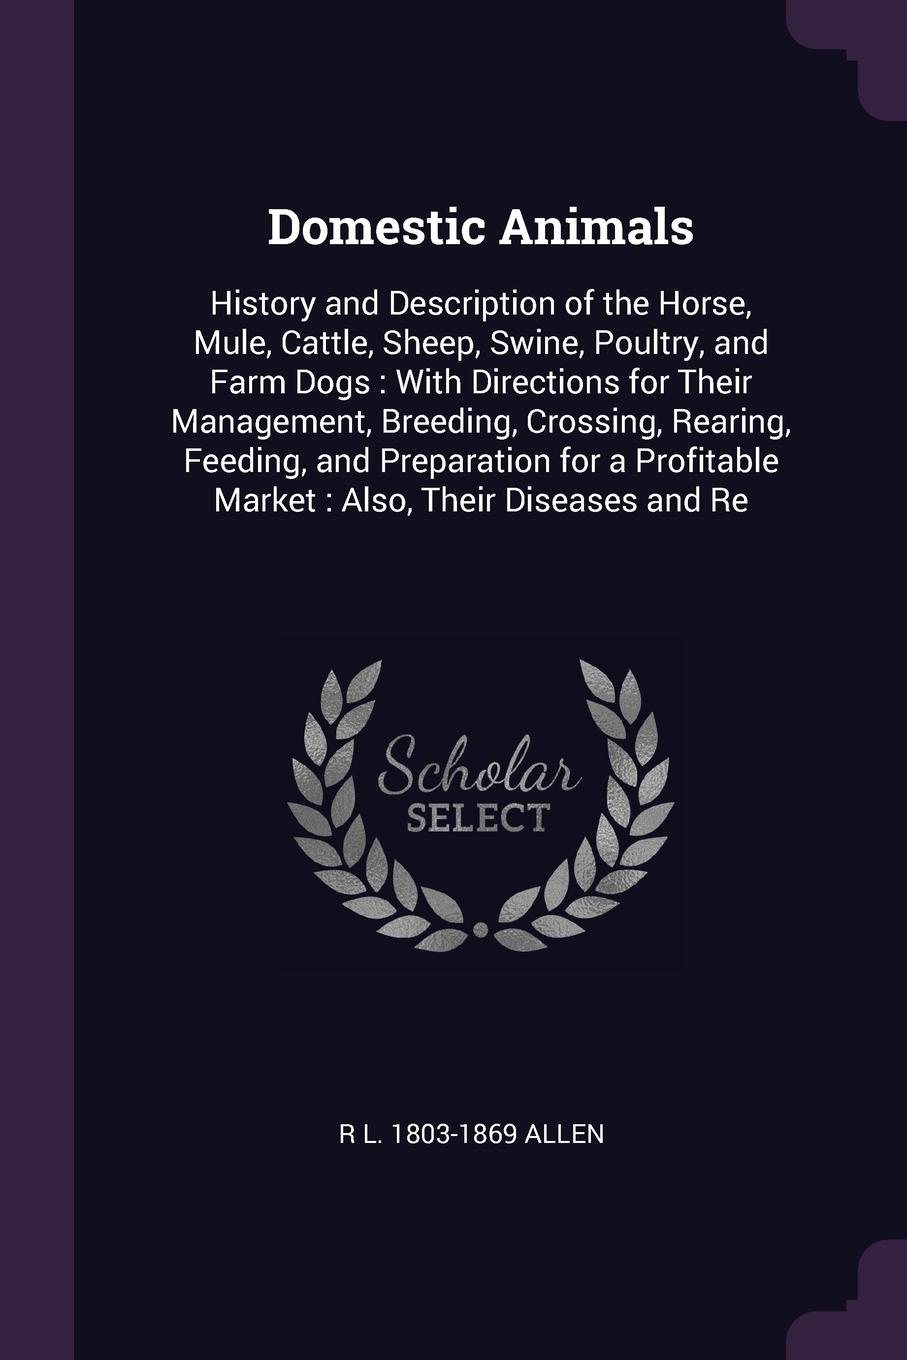 Domestic Animals. History and Description of the Horse, Mule, Cattle, Sheep, Swine, Poultry, and Farm Dogs : With Directions for Their Management, Breeding, Crossing, Rearing, Feeding, and Preparation for a Profitable Market : Also, Their Diseases...